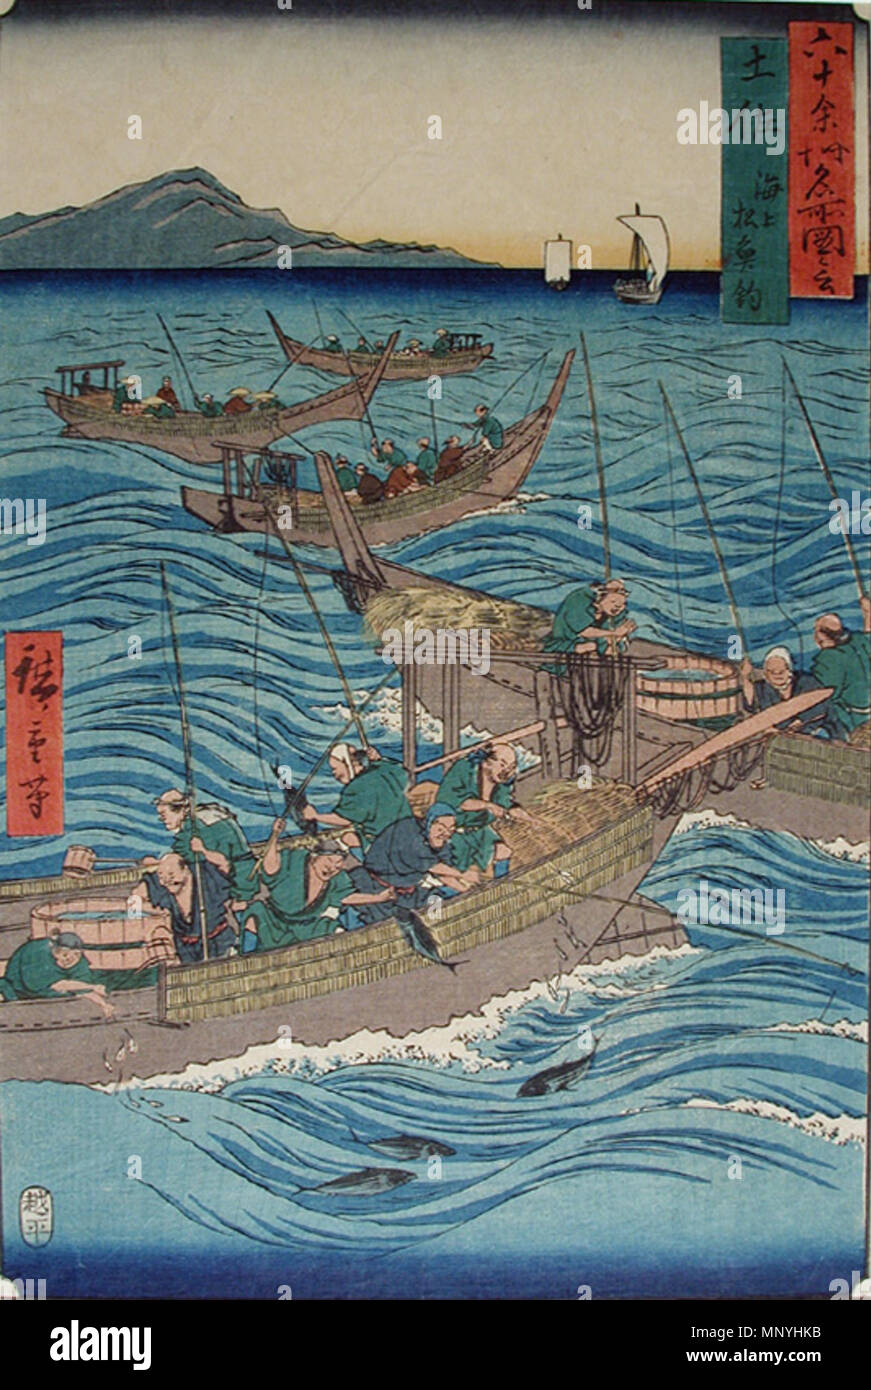 . English: Accession Number: 1957.323 Display Artist: Utagawa Hiroshige Display Title: 'Tosa Province, Bonito Fishing at Sea' Translation(s): '(Tosa, Kaijo katsuo tsuri)' Series Title: Famous Views of the Sixty-odd Provinces Suite Name: Rokujuyoshu meisho zue Creation Date: 1855 Medium: Woodblock Height: 13 1/2 in. Width: 9 in. Display Dimensions: 13 1/2 in. x 9 in. (34.29 cm x 22.86 cm) Publisher: Koshimuraya Heisuke Credit Line: Bequest of Mrs. Cora Timken Burnett Label Copy: 'One of Series: Rokuju ye Shin. Meisho dzu. ''Views of 60 or More Provinces''. Published by Koshei kei in 1853-1856.  Stock Photo